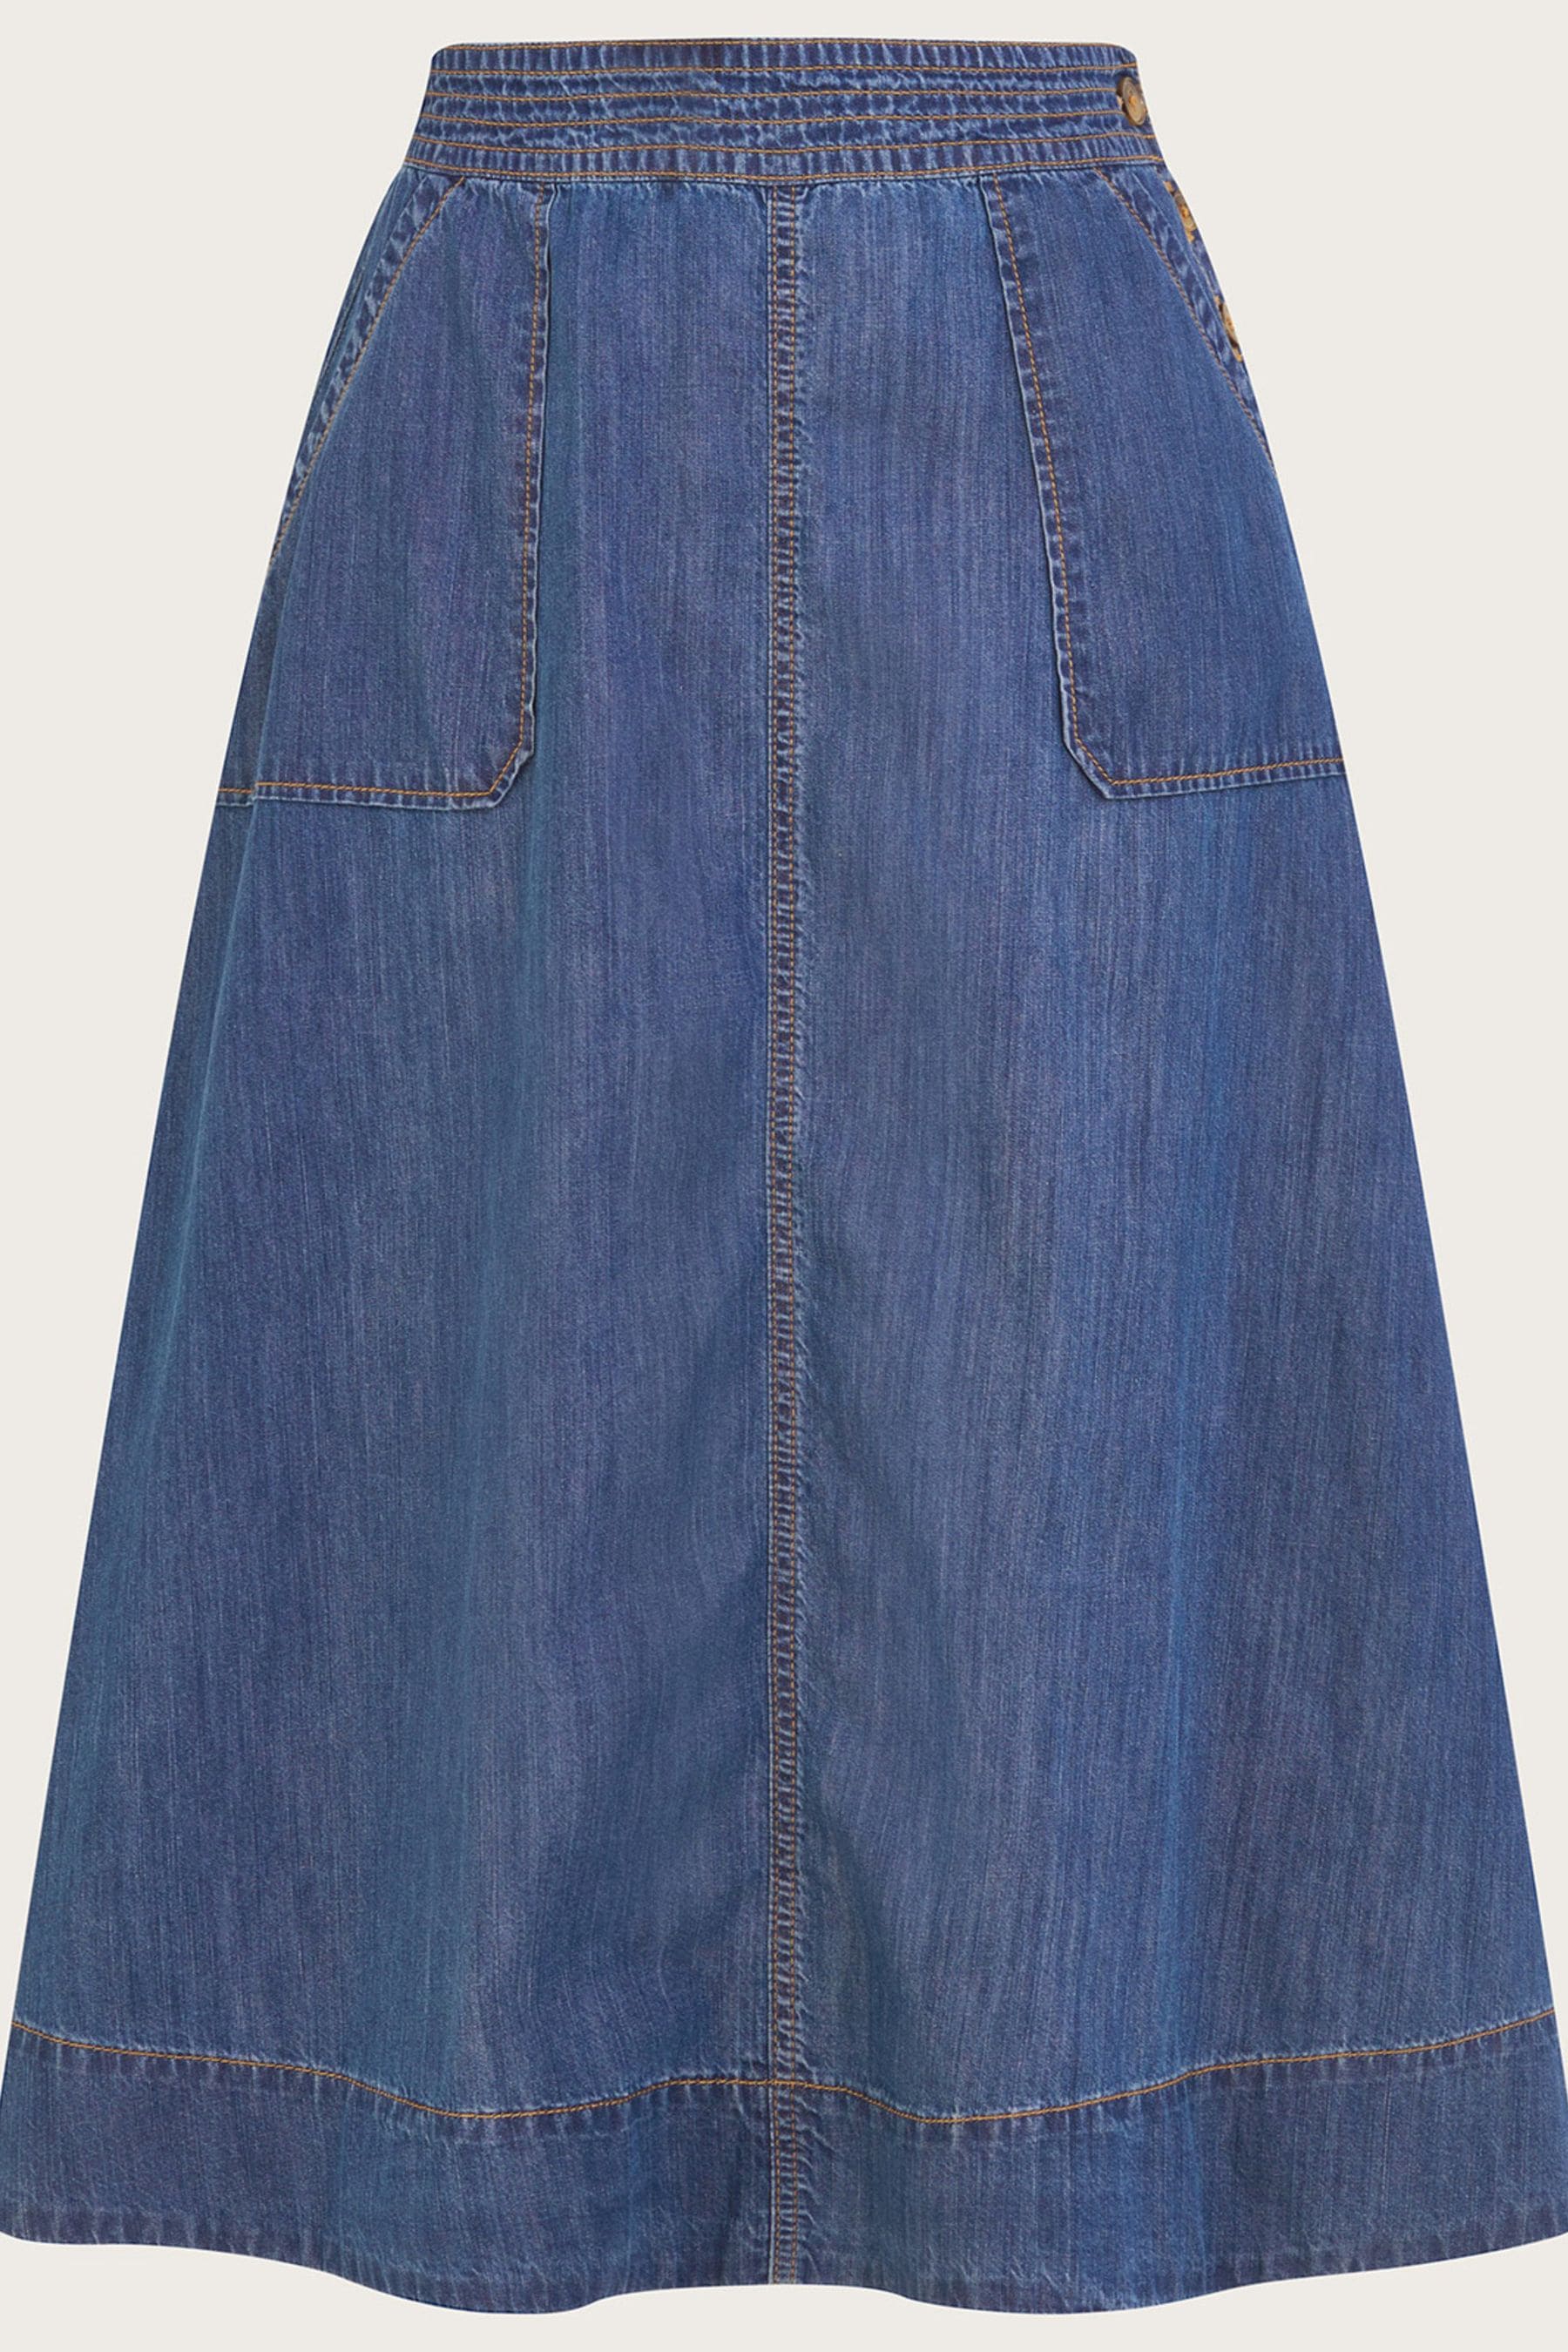 Buy Monsoon Blue Pull-On Denim Midi Skirt in Sustainable Cotton from ...